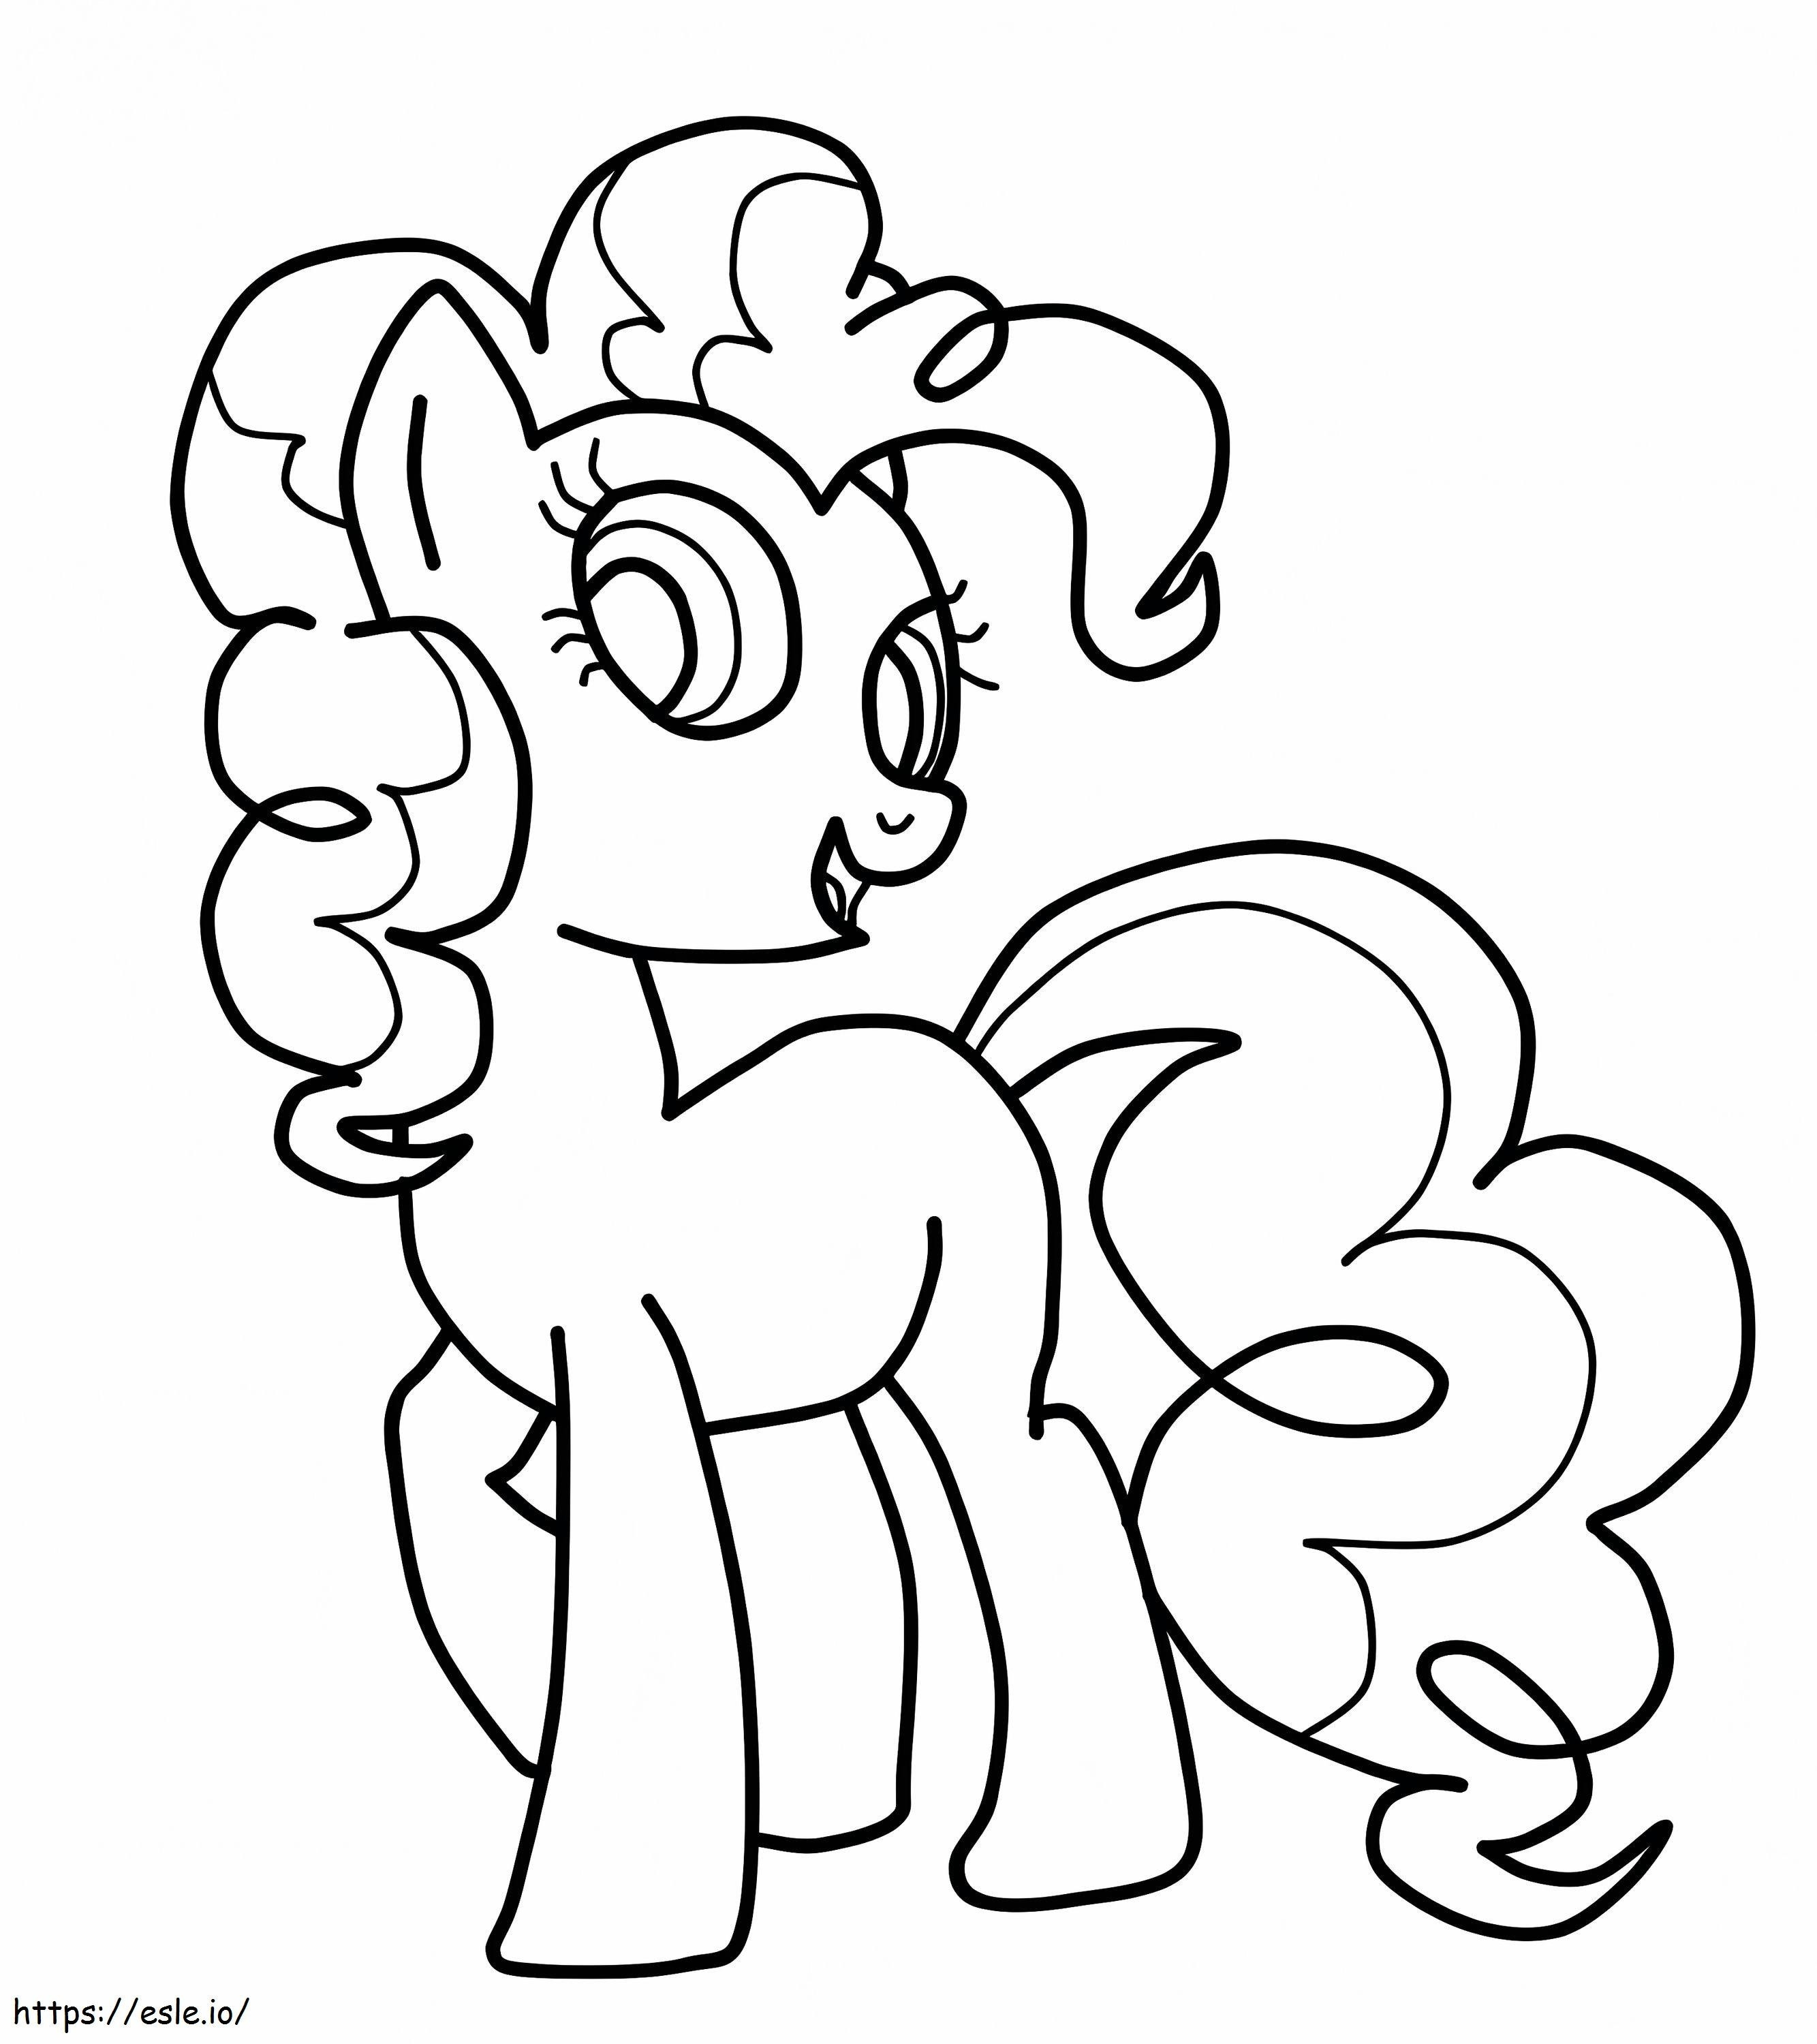 Easy Pinkie Pie coloring page